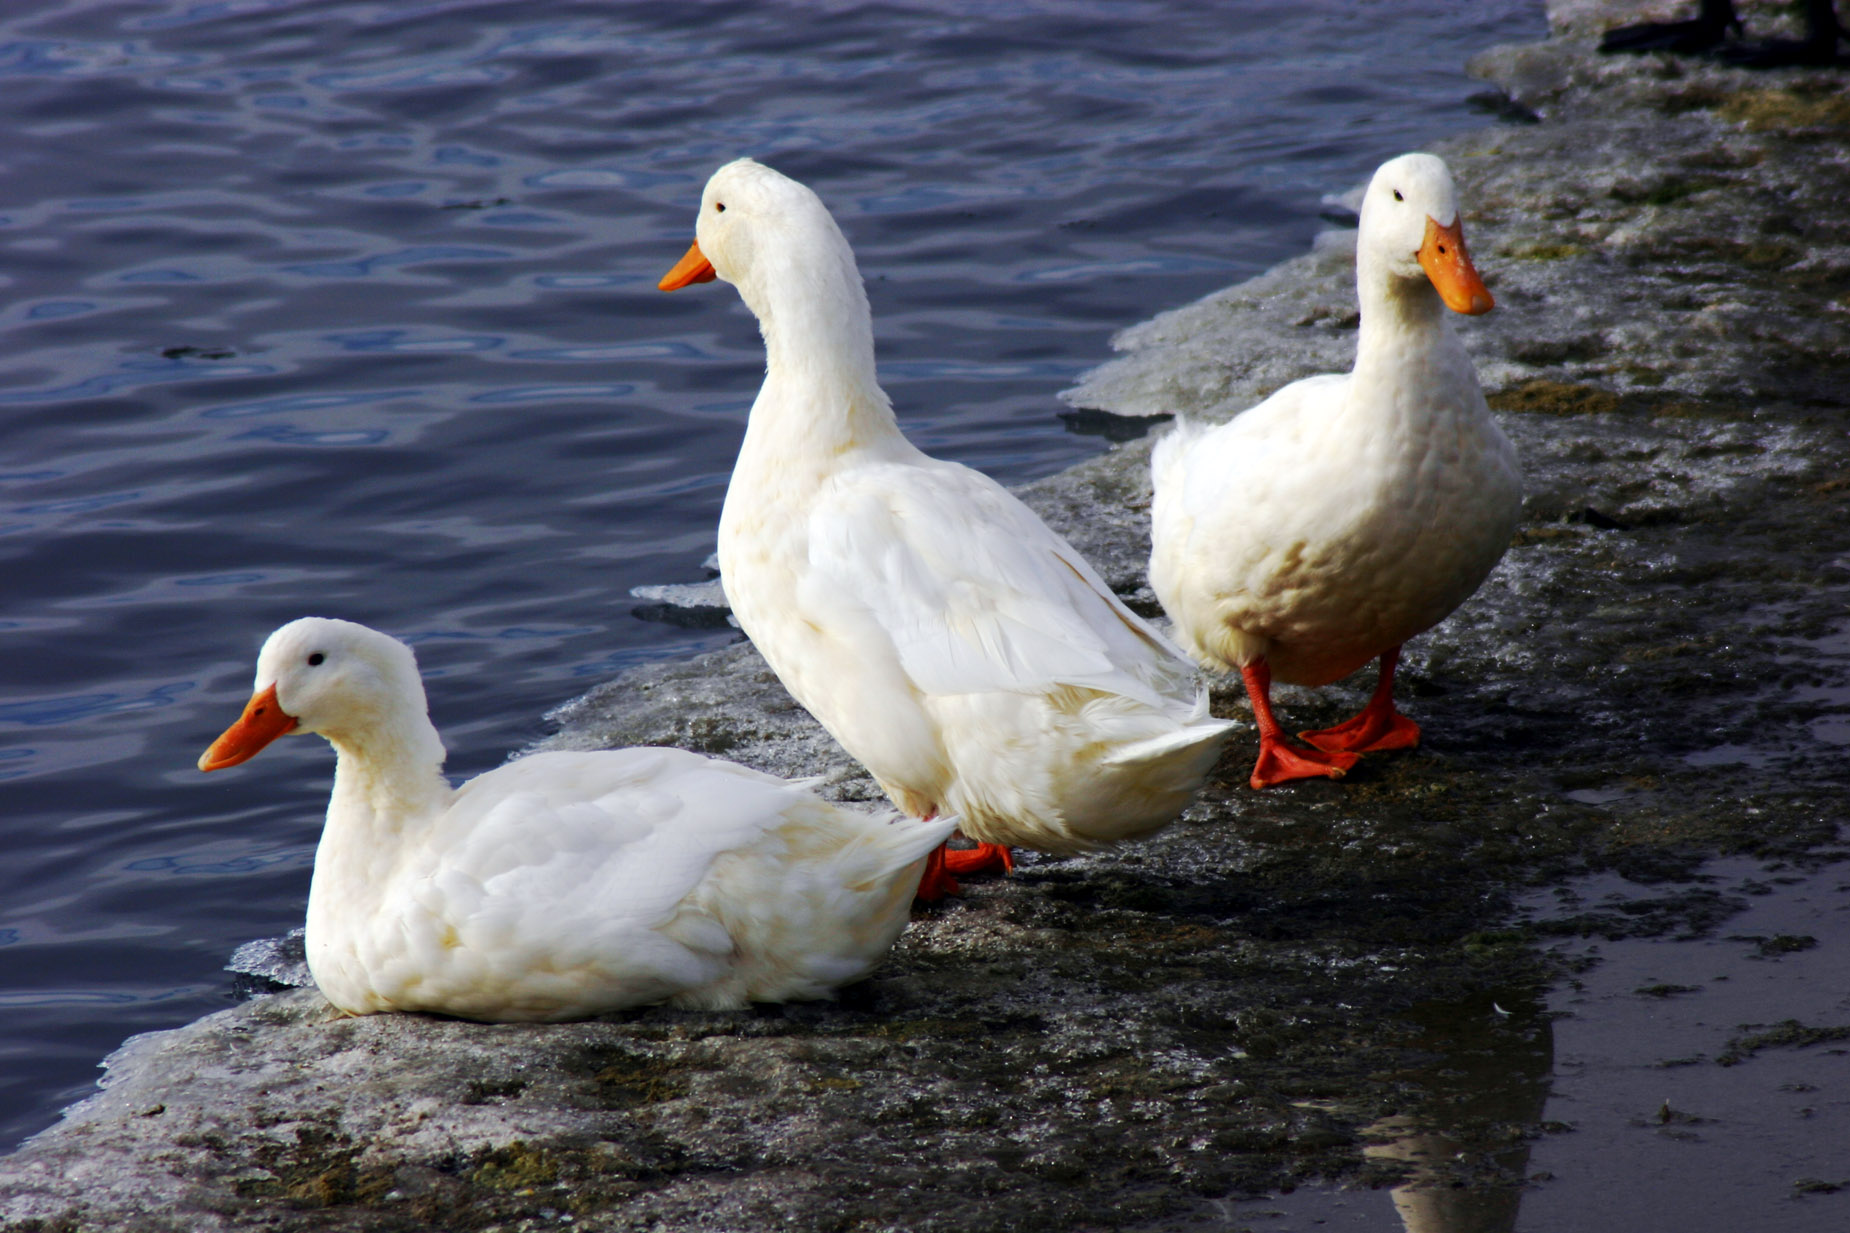 View image - Three White Ducks - Abstract Influence